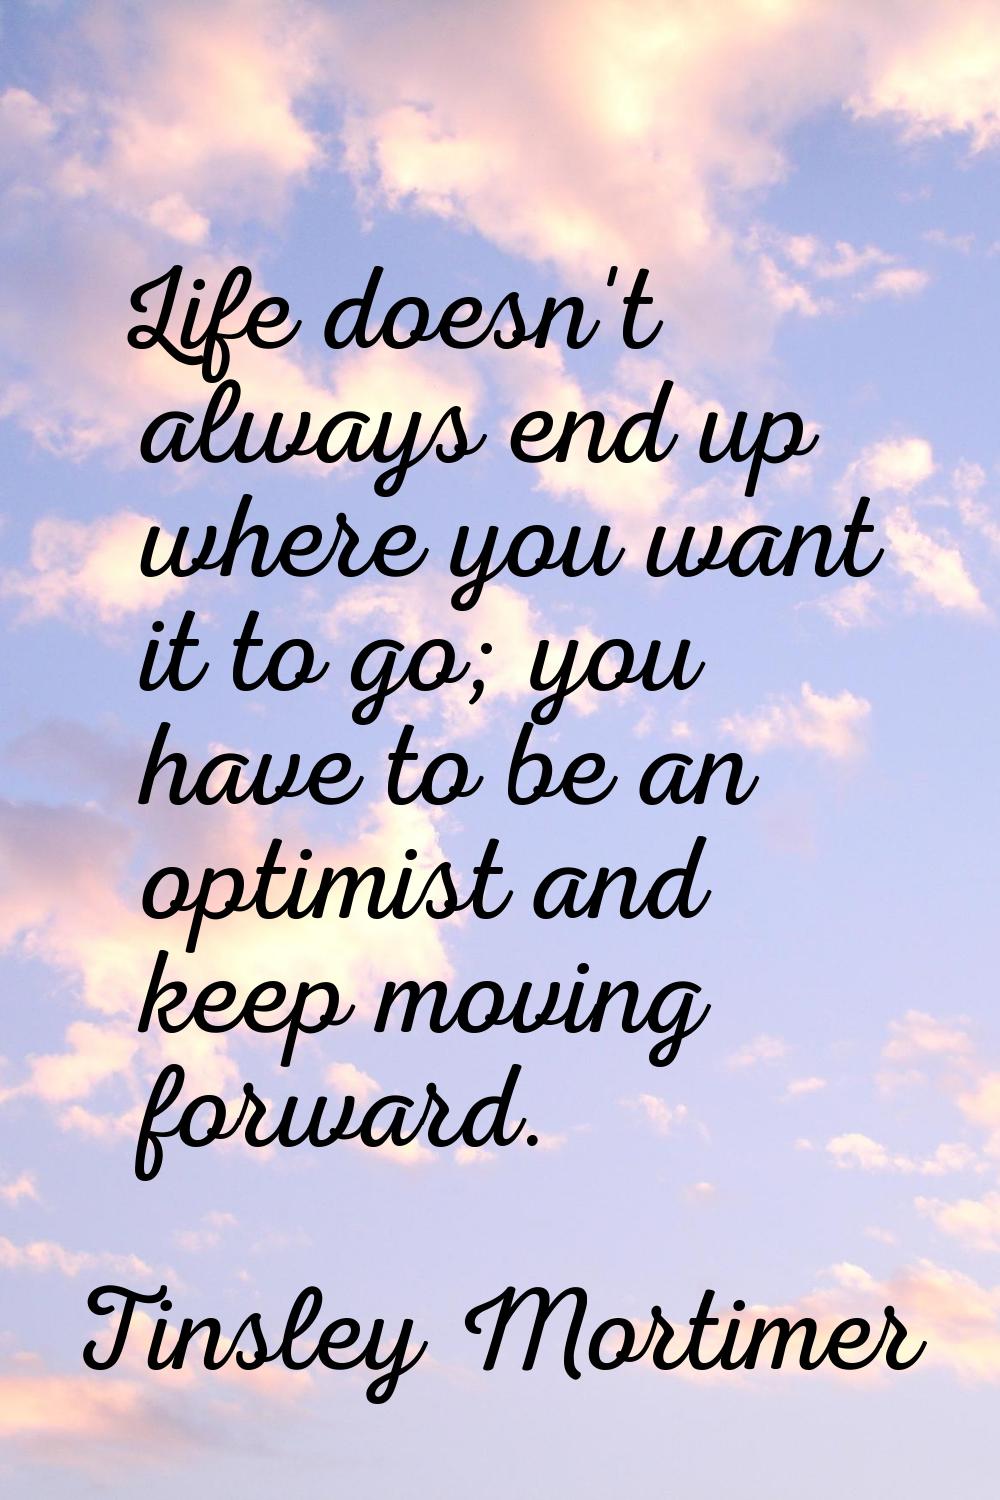 Life doesn't always end up where you want it to go; you have to be an optimist and keep moving forw